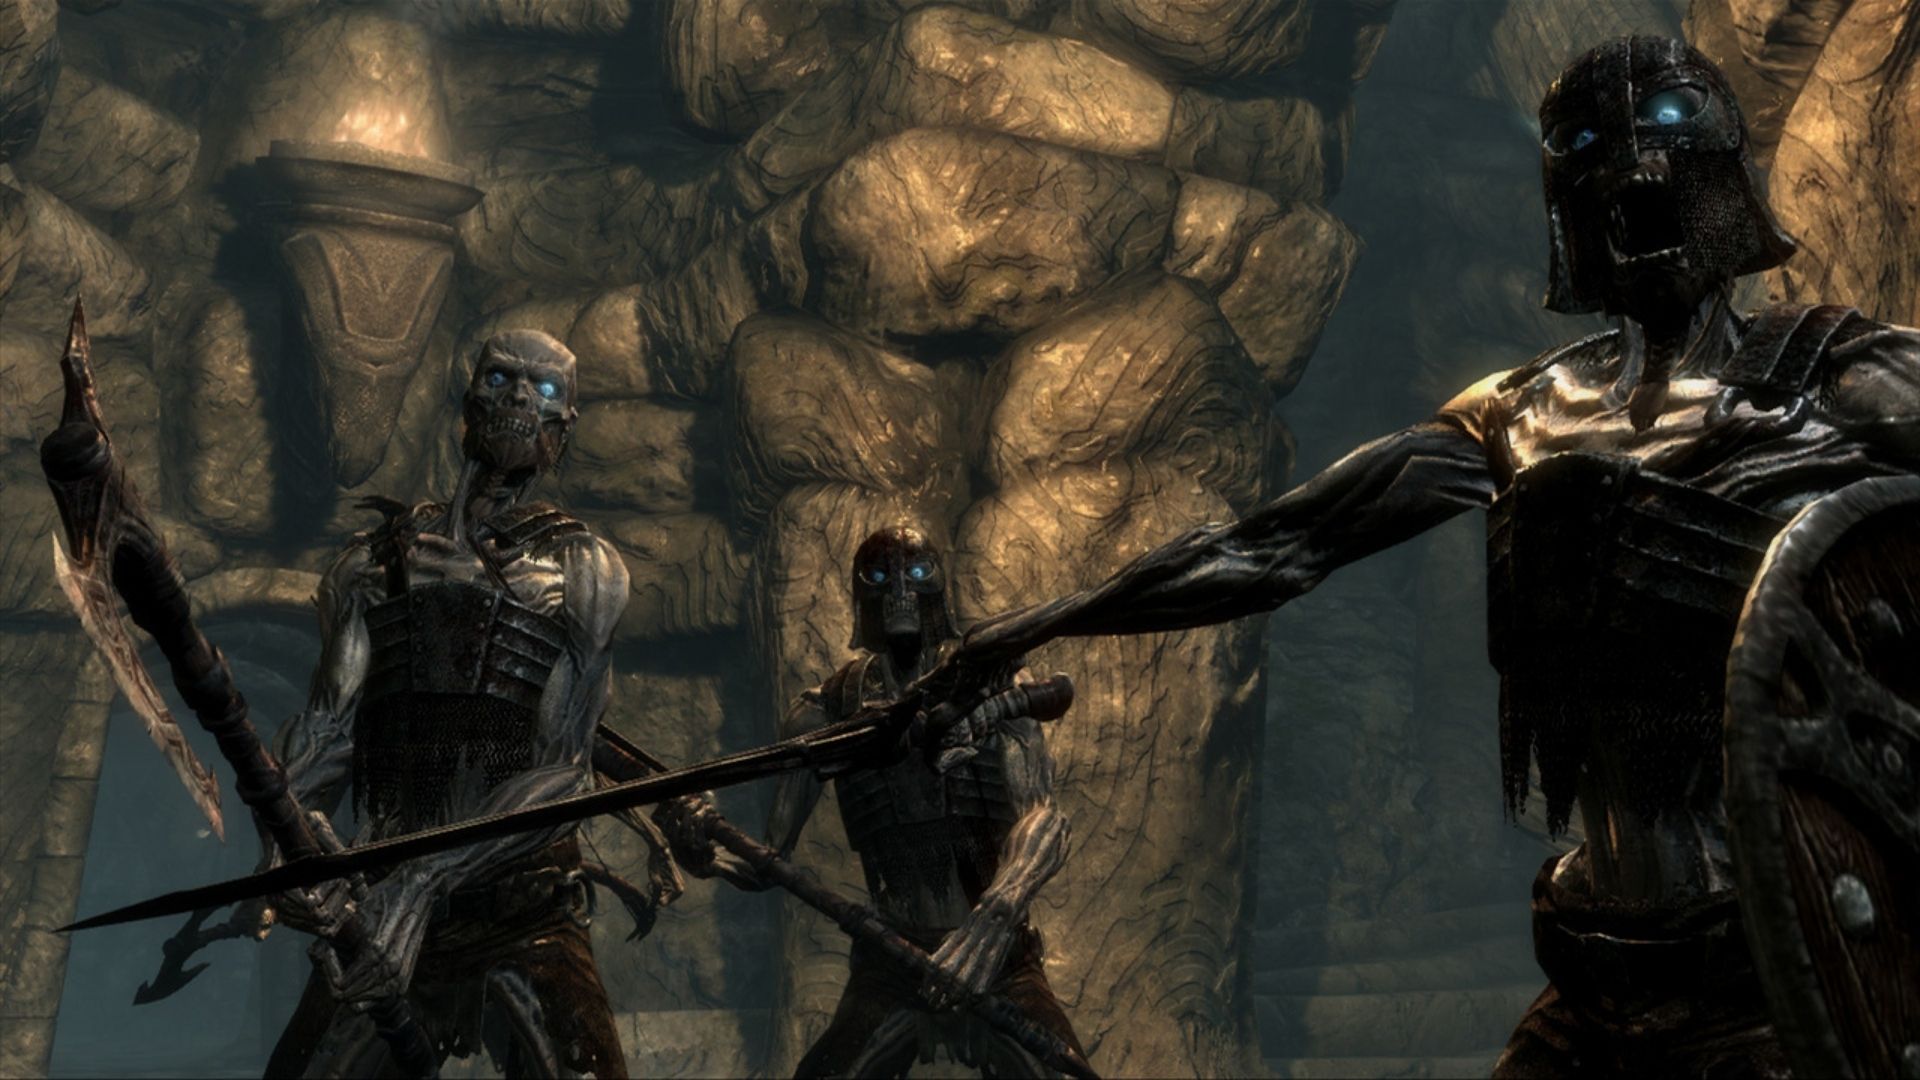 Skeletons adorned in armour and wielding weapons from the game Skyrim.